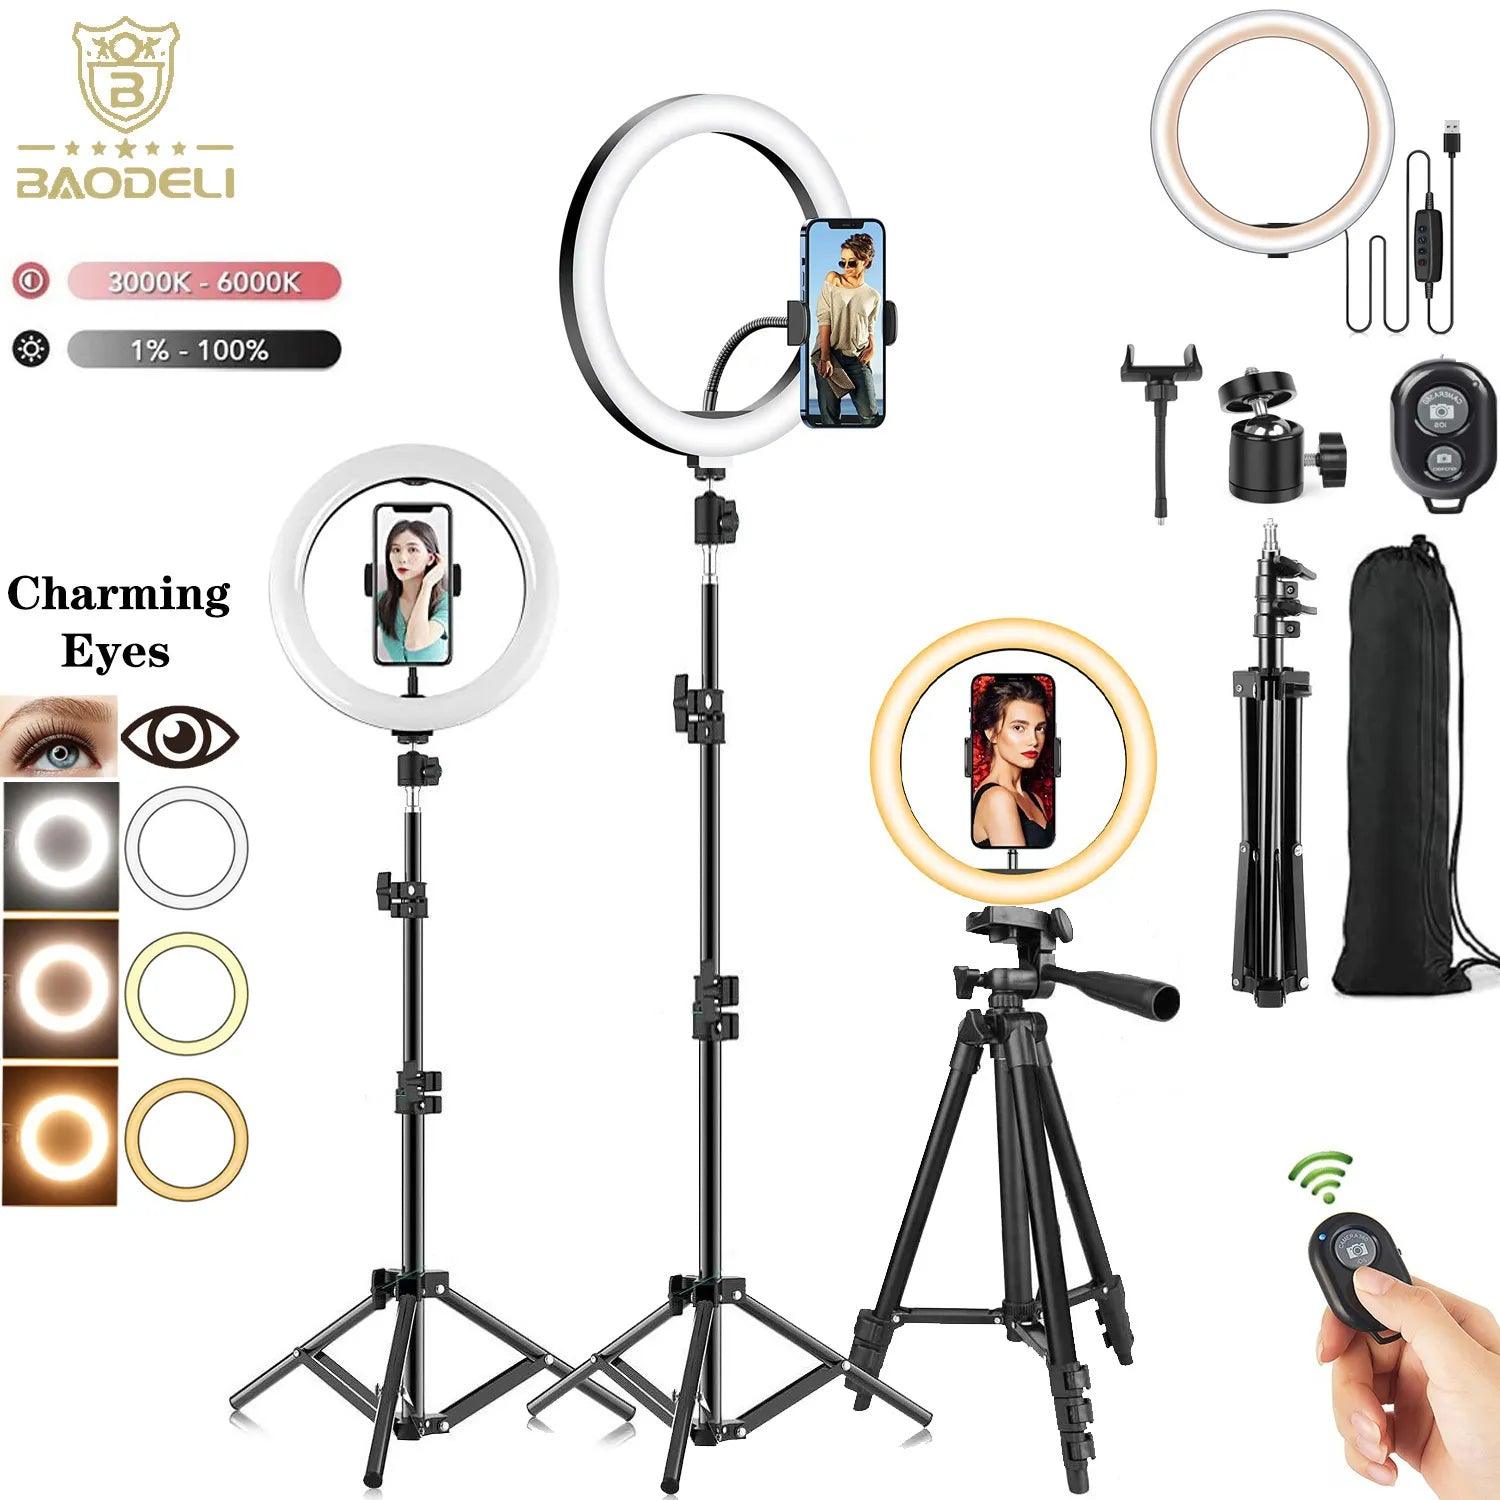 LED Ring Light with Phone Stand Tripod - Dimmable Fill Light for Photography, Video, and Streaming  ourlum.com   